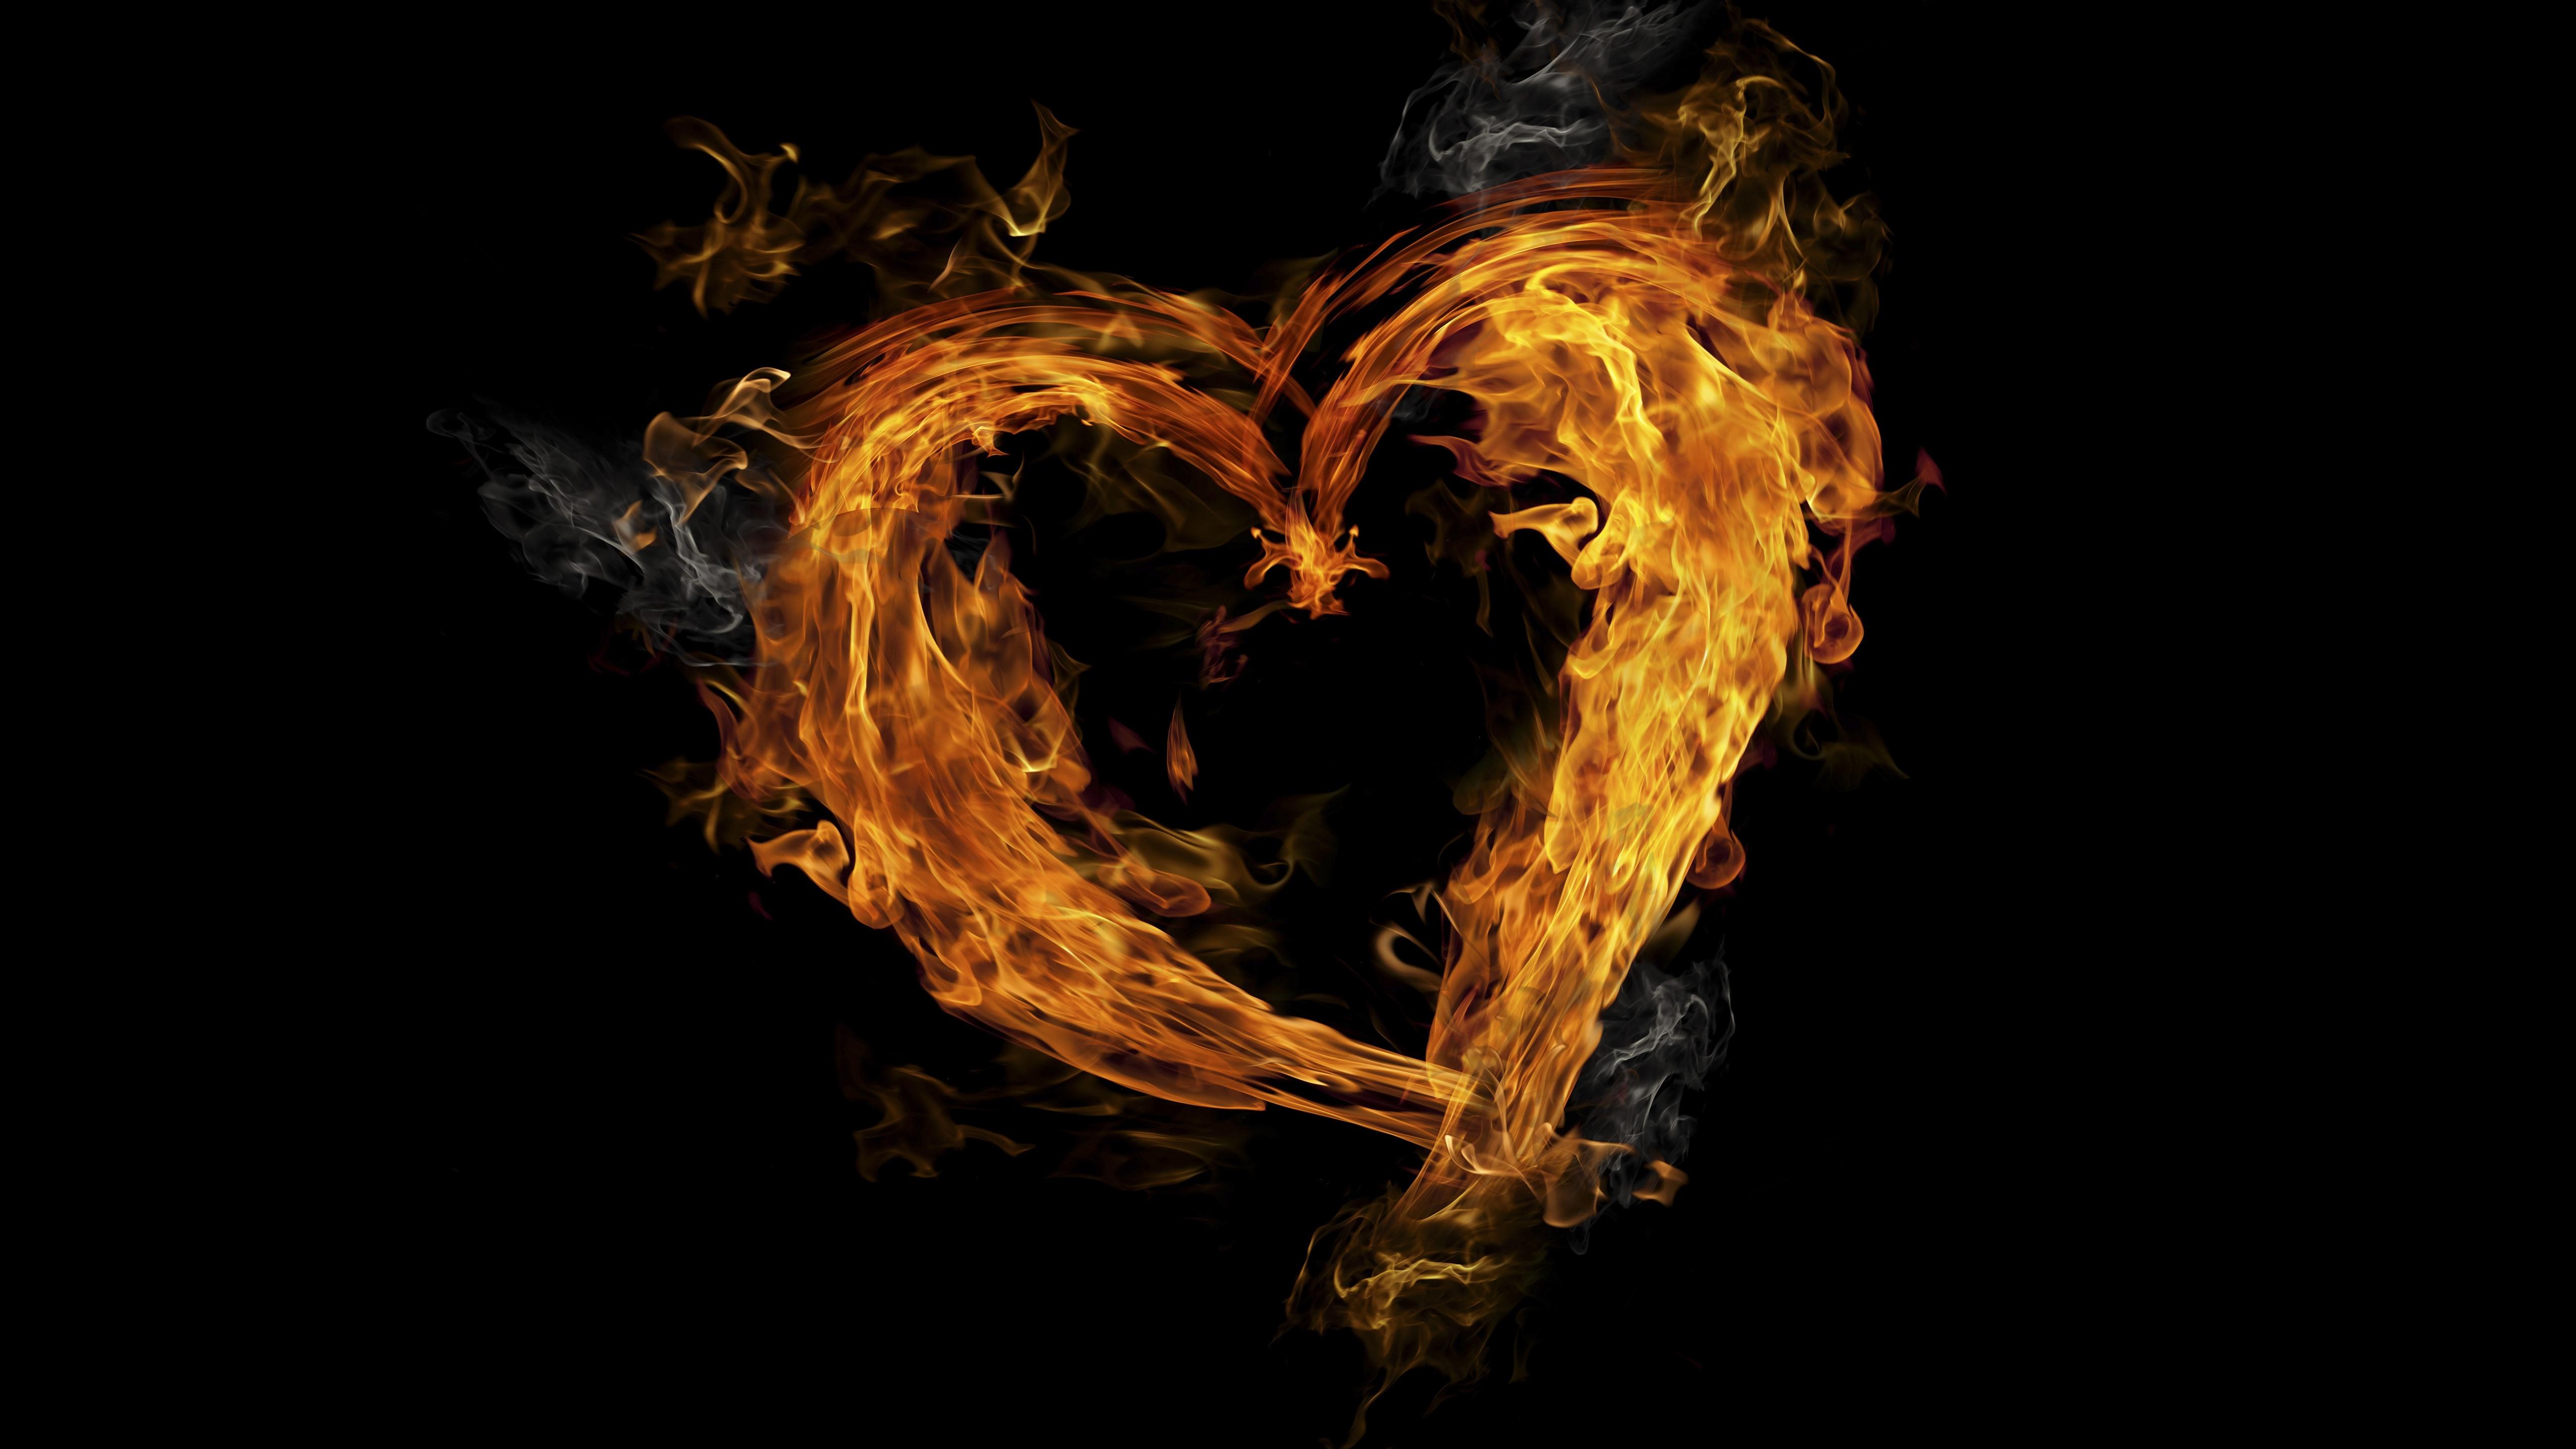 Wallpaper Fire, flame, love heart 5120x2880 UHD 5K Picture, Image